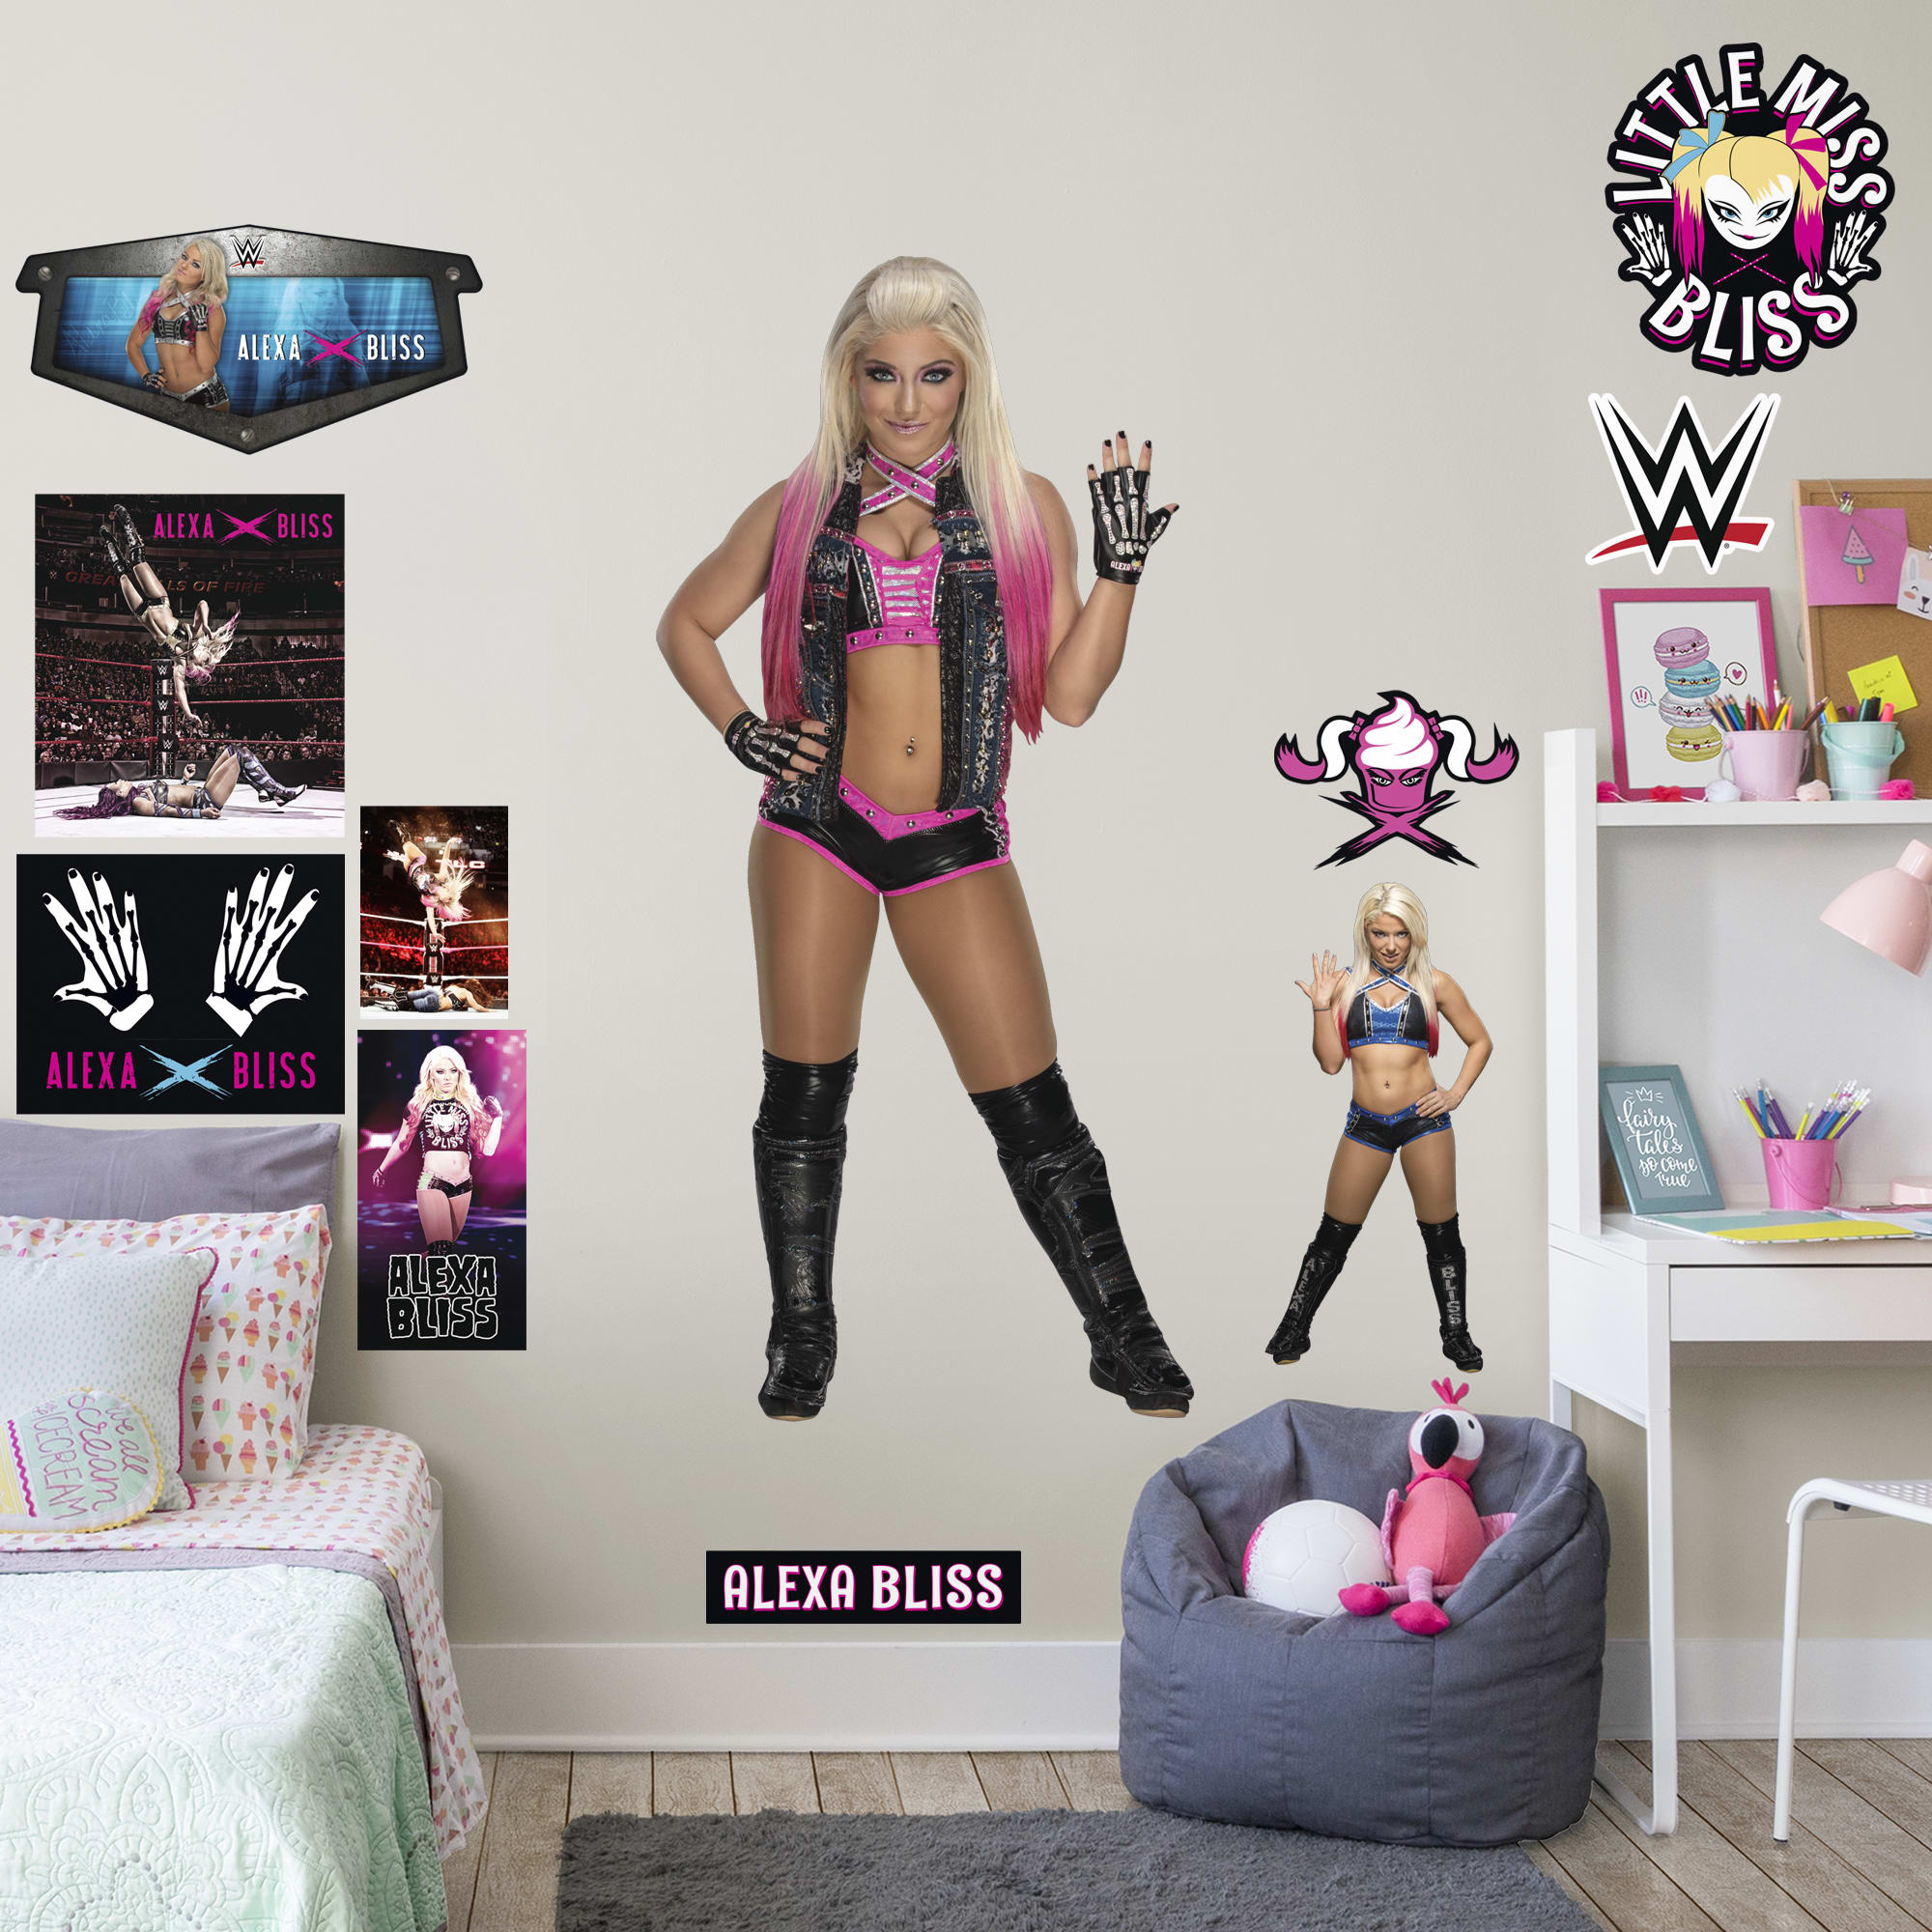 Alexa Bliss for WWE - Officially Licensed Removable Wall Decal Life-Size Superstar + 11 Decals (31"W x 67"H) by Fathead | Vinyl